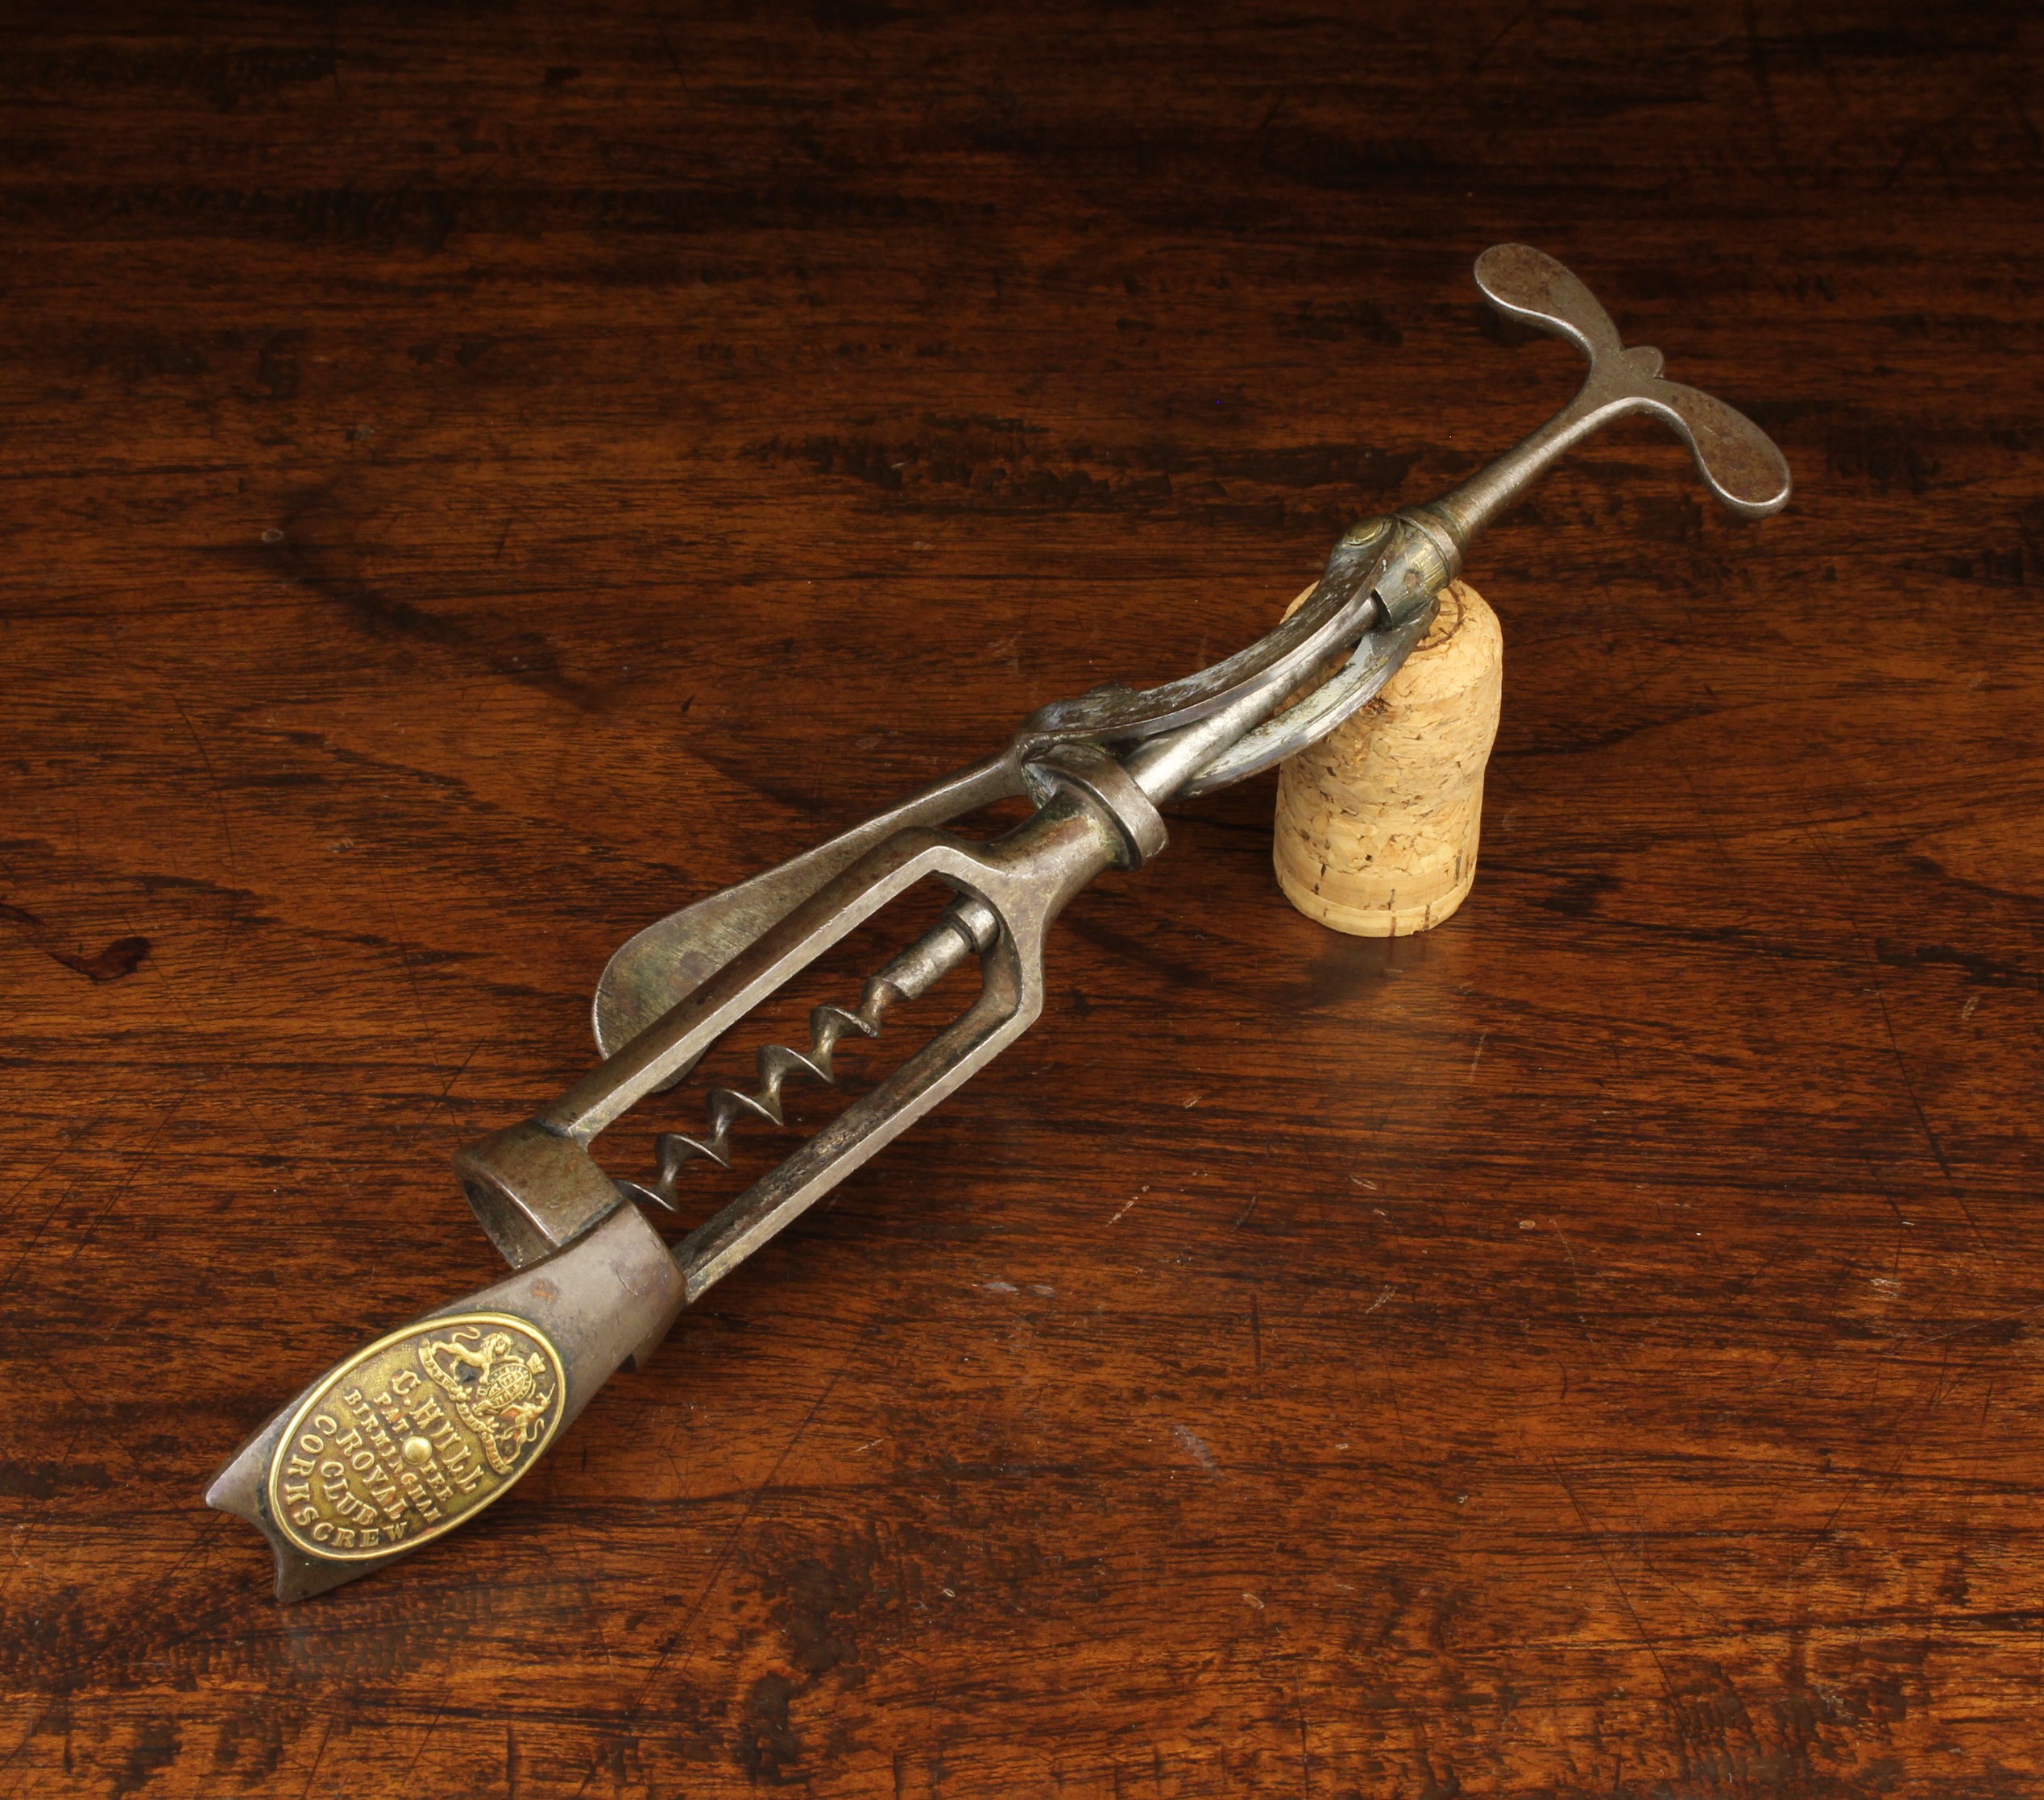 A Chas Hulls Patent Royal Club Single Lever Corkscrew with a brass badge marked "C.